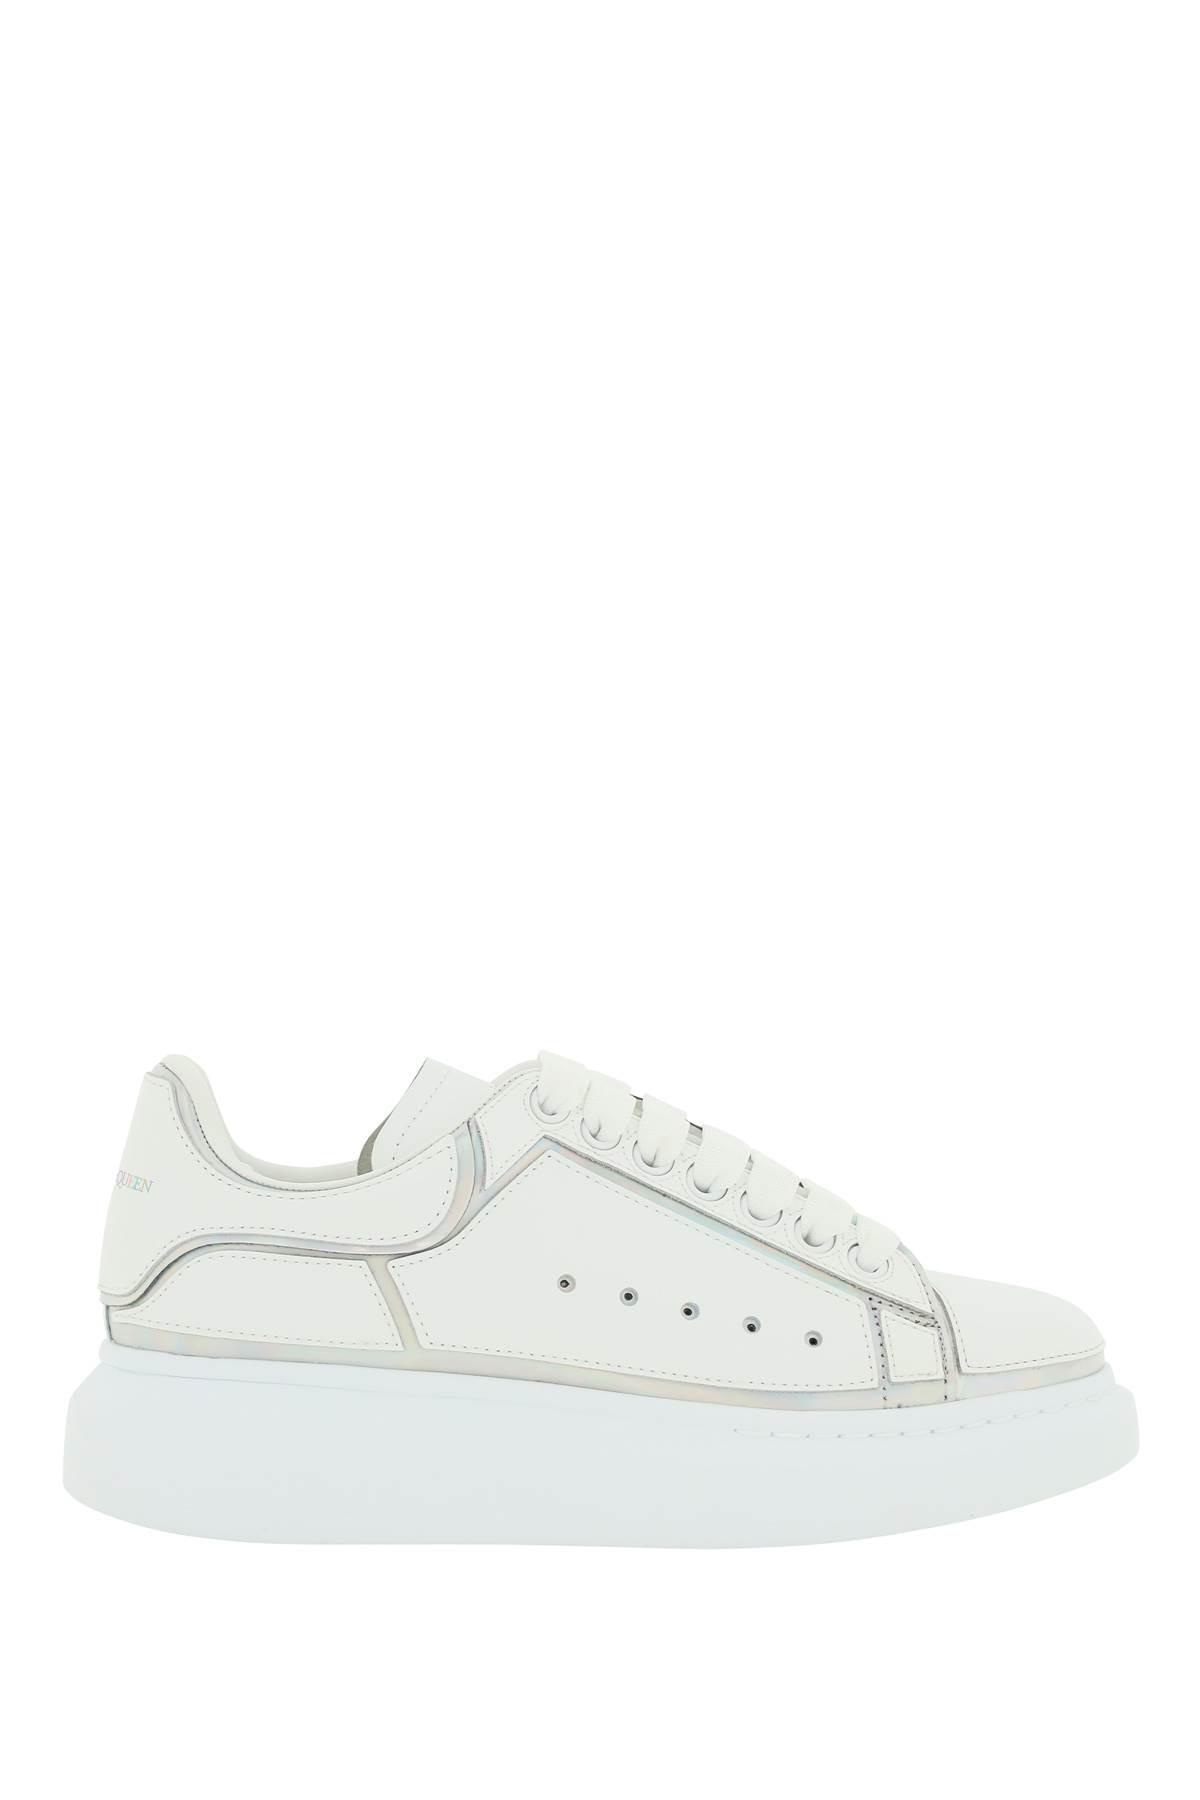 Alexander McQueen Holographic Leather Oversize Sneakers in White | Lyst